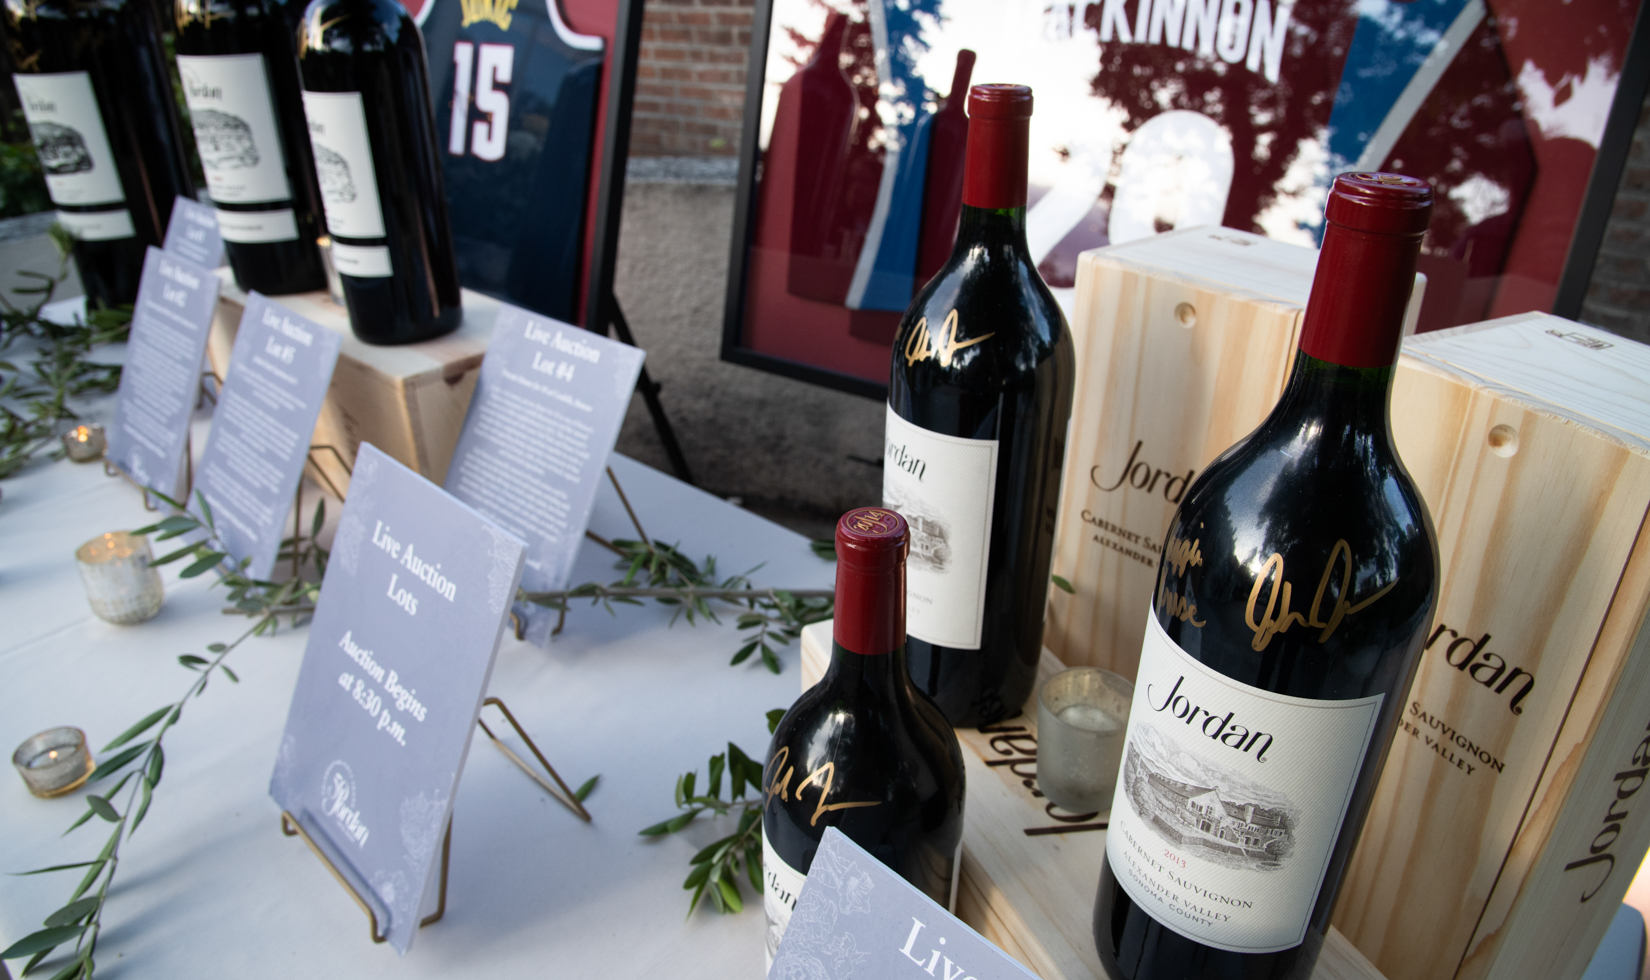 signed wine bottles and sports memorabilia on display for silent auction